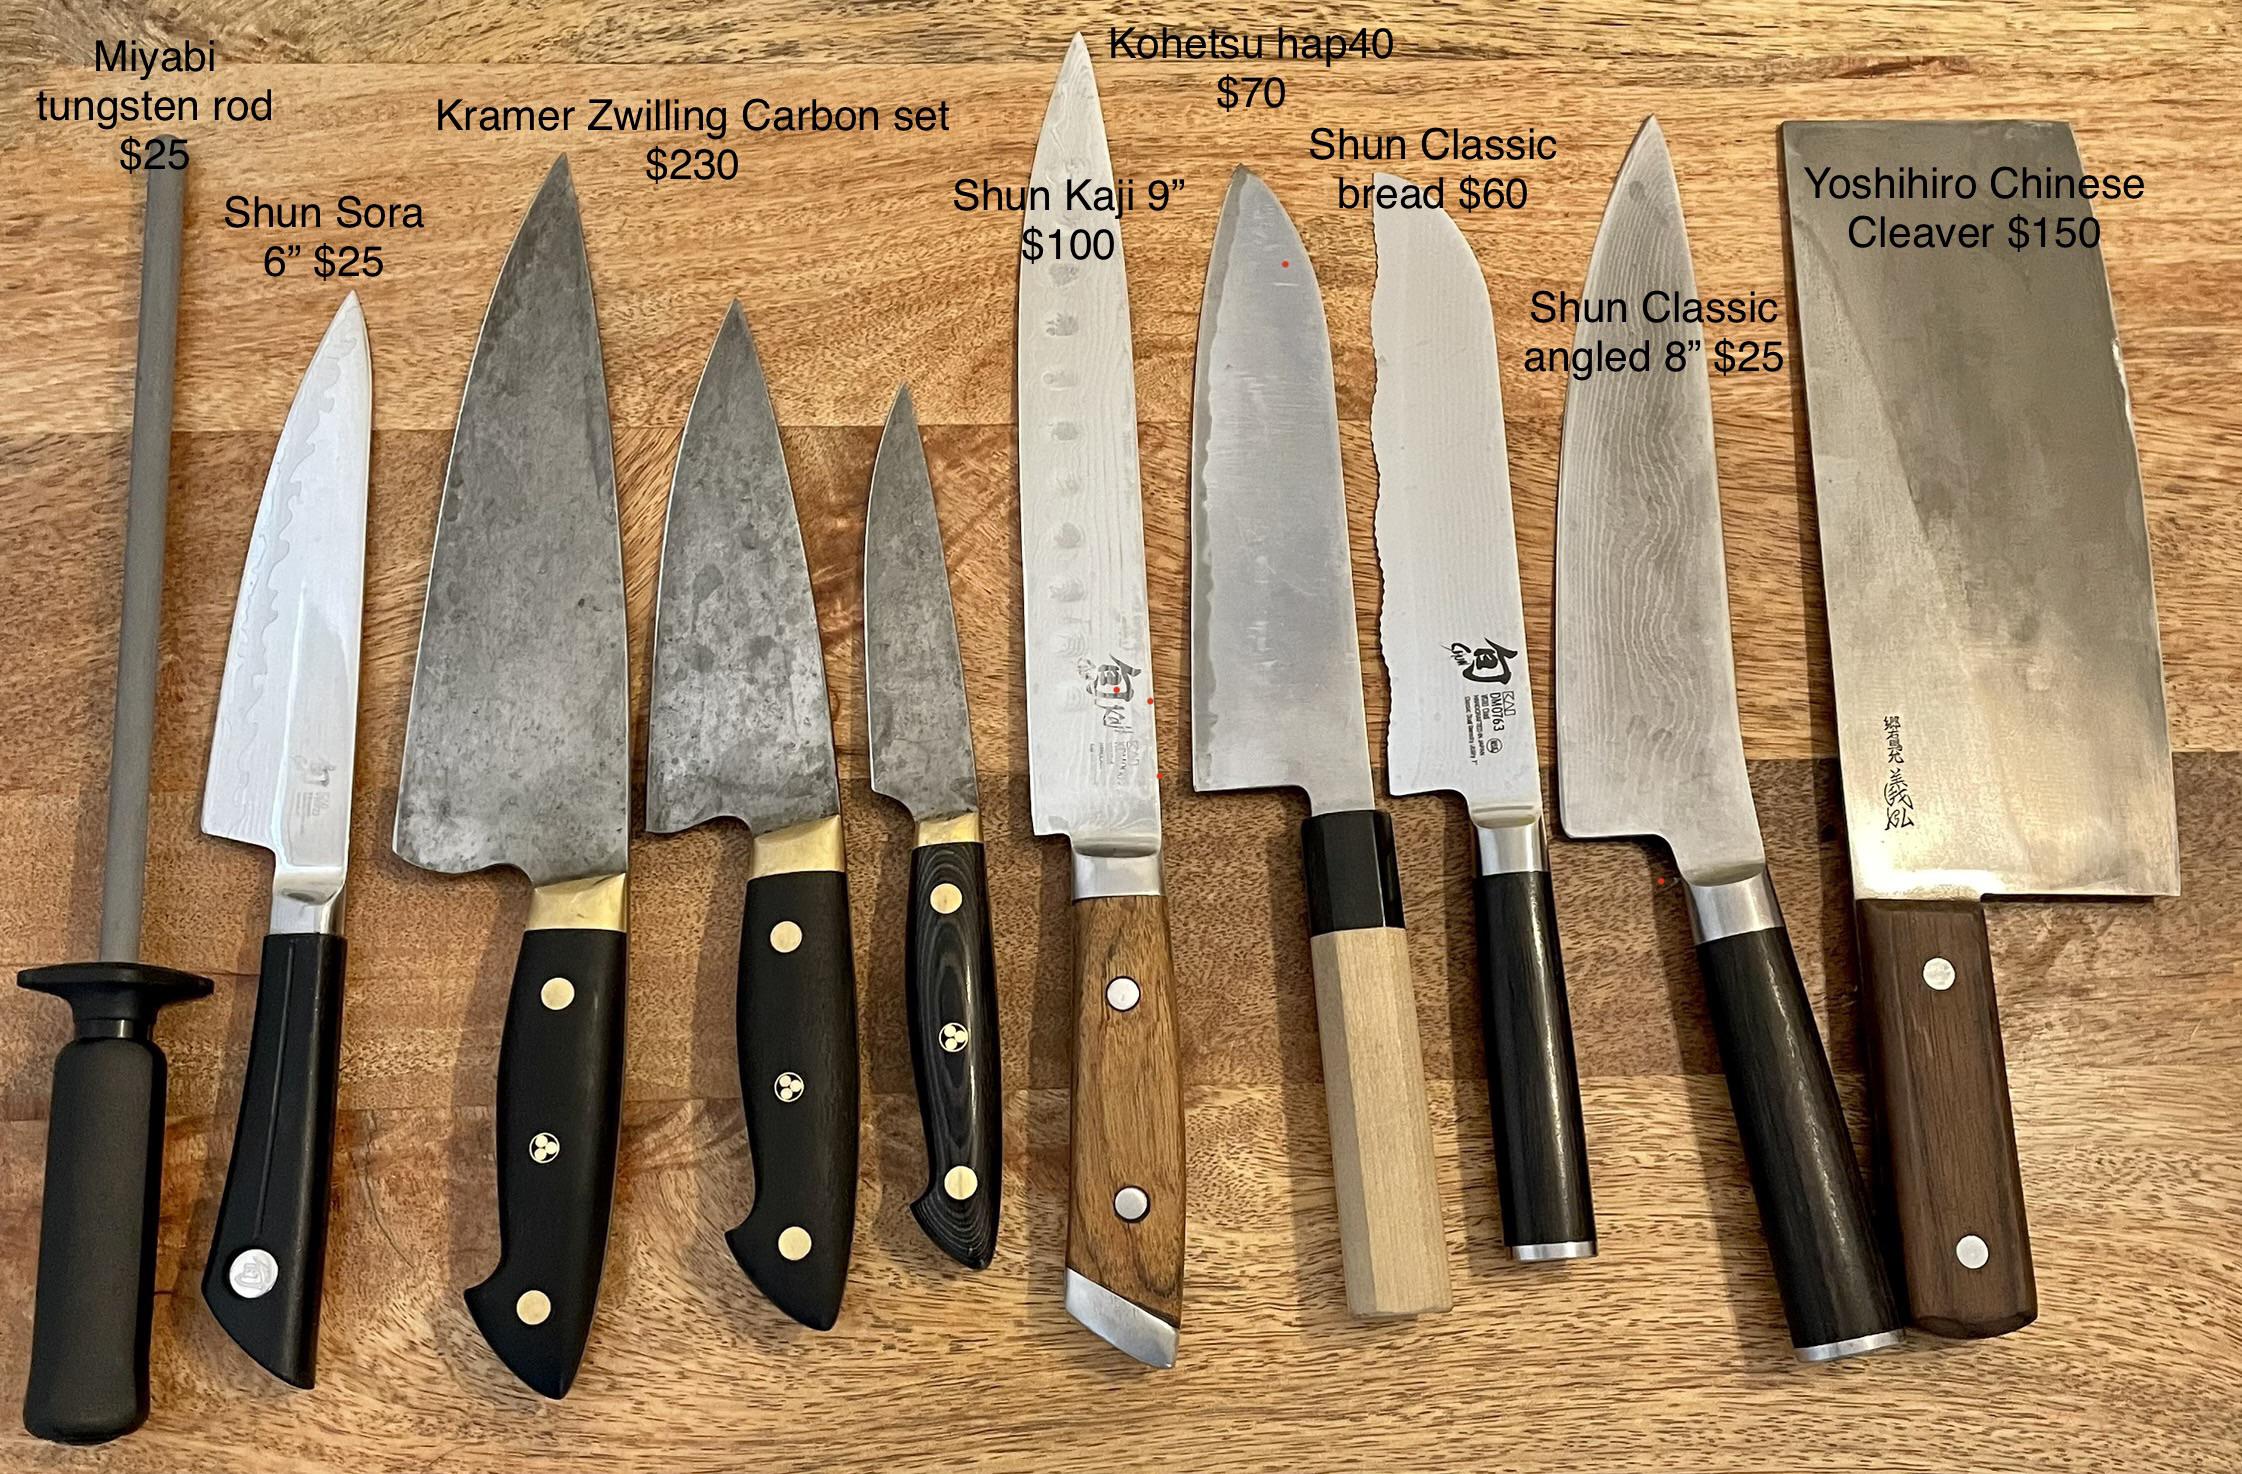 Set of used knife with each knife name and price